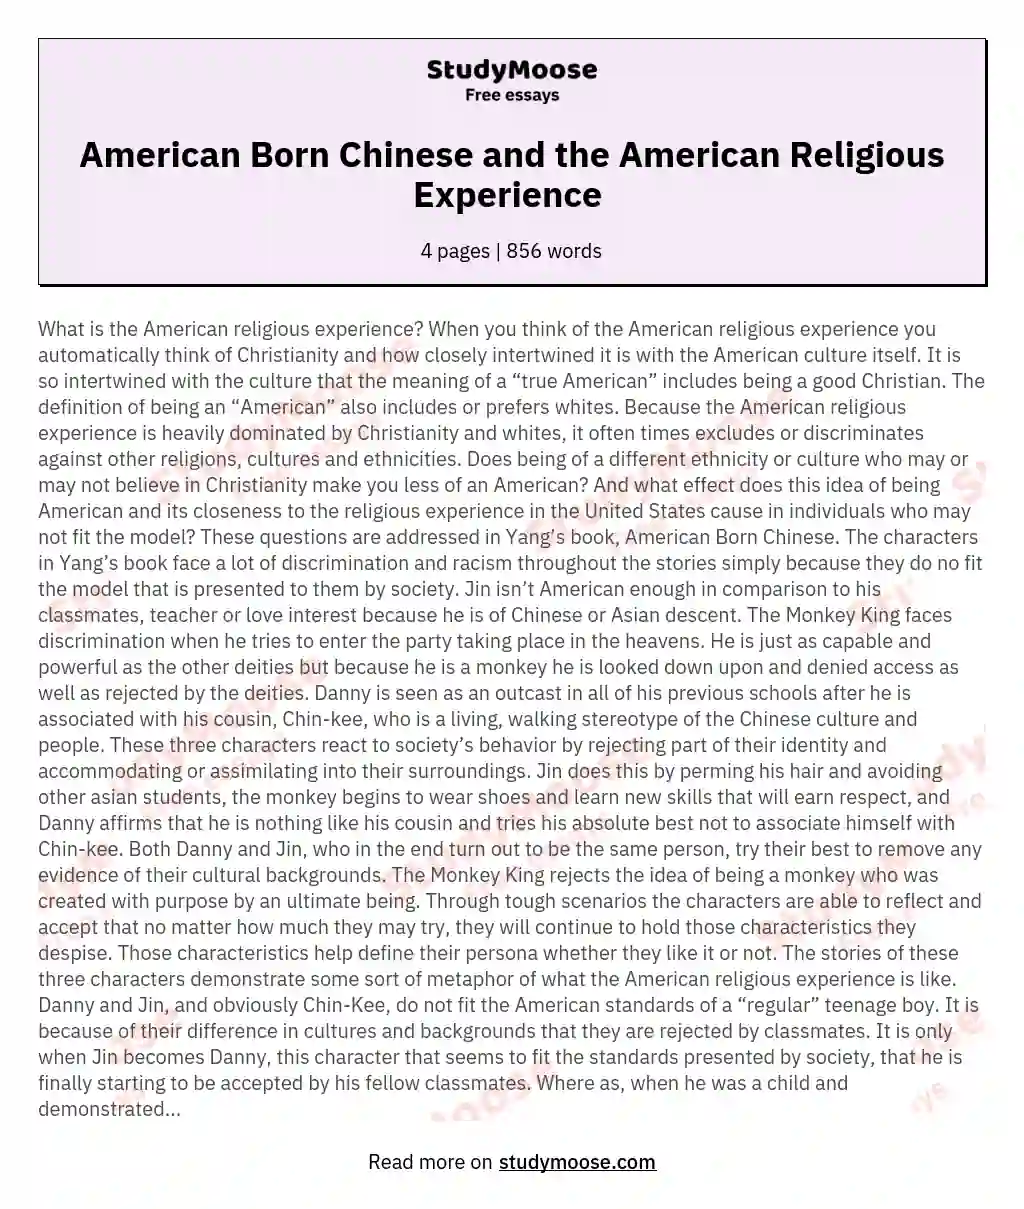 American Born Chinese and the American Religious Experience  essay